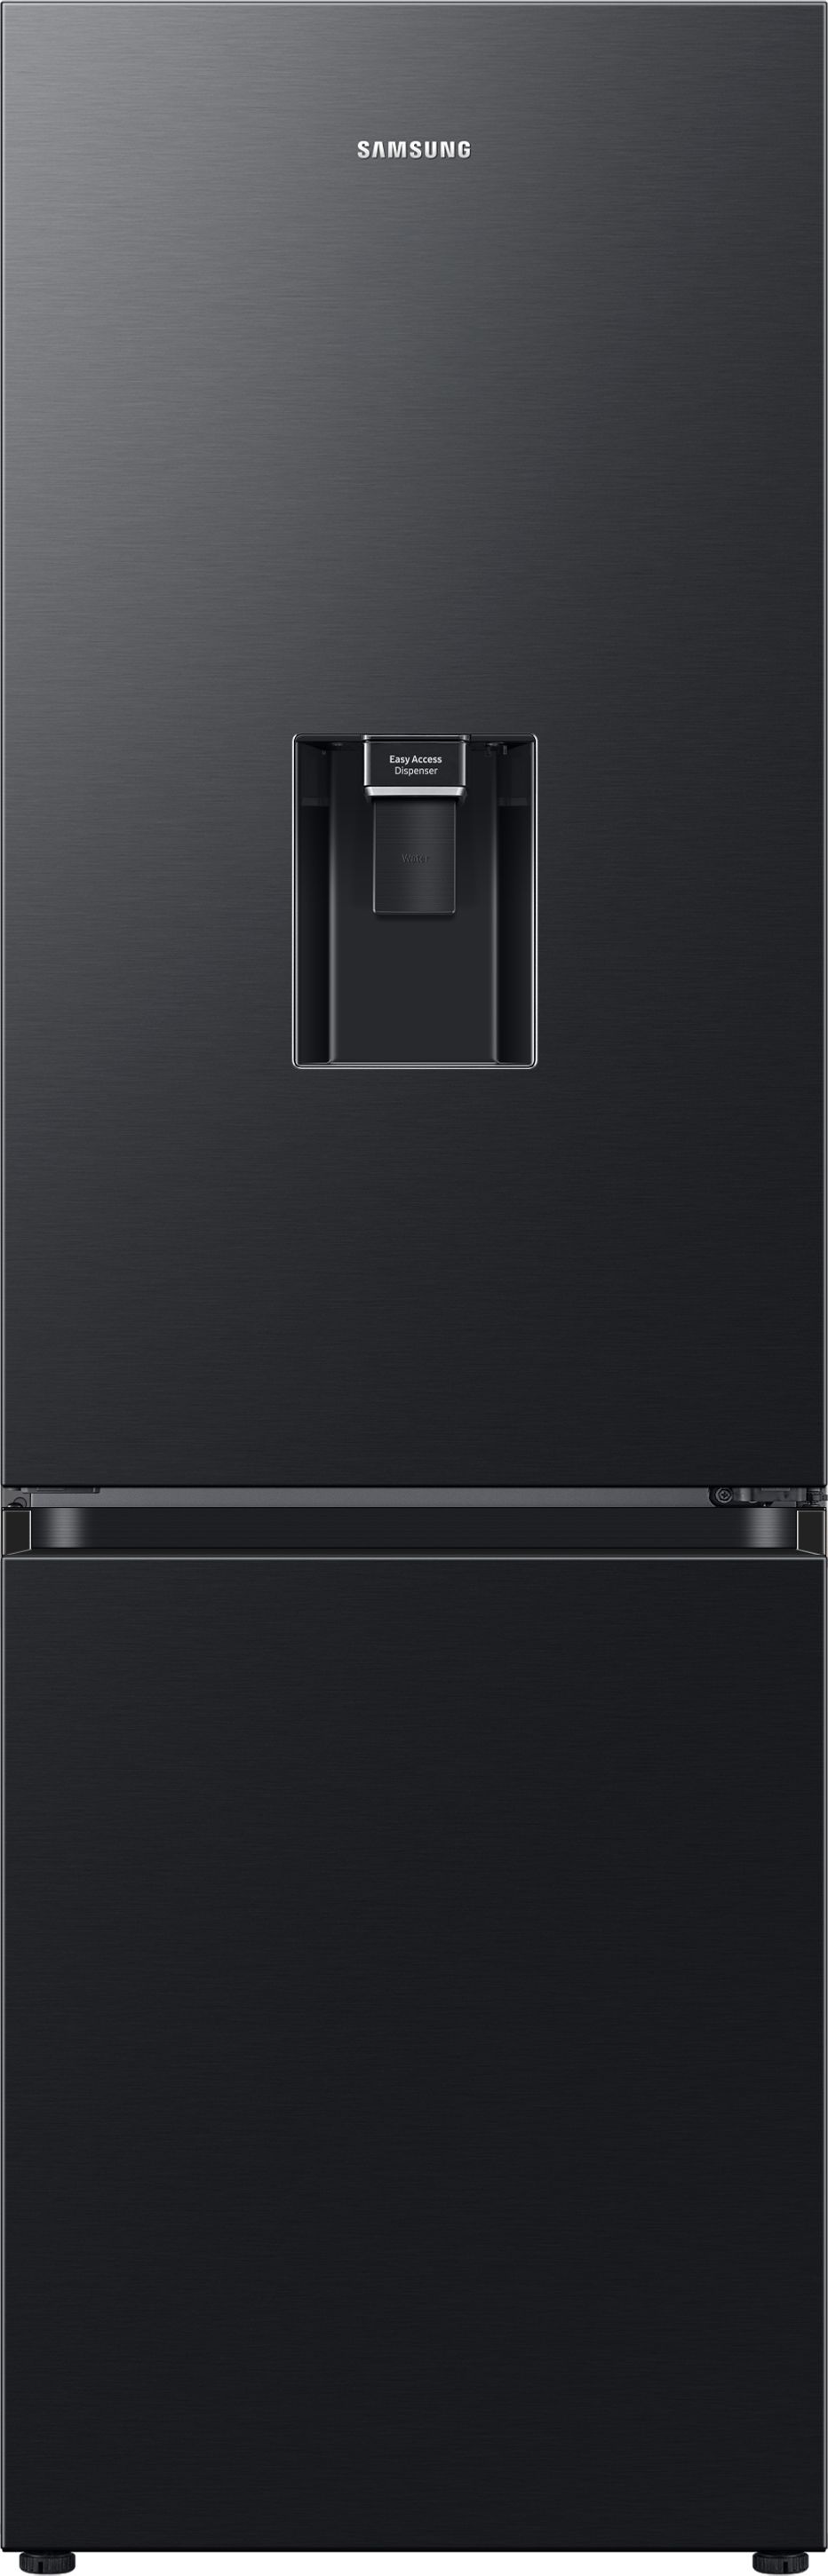 Samsung Series 6 RB34C632EBN Wifi Connected 70/30 No Frost Fridge Freezer - Black - E Rated, Black